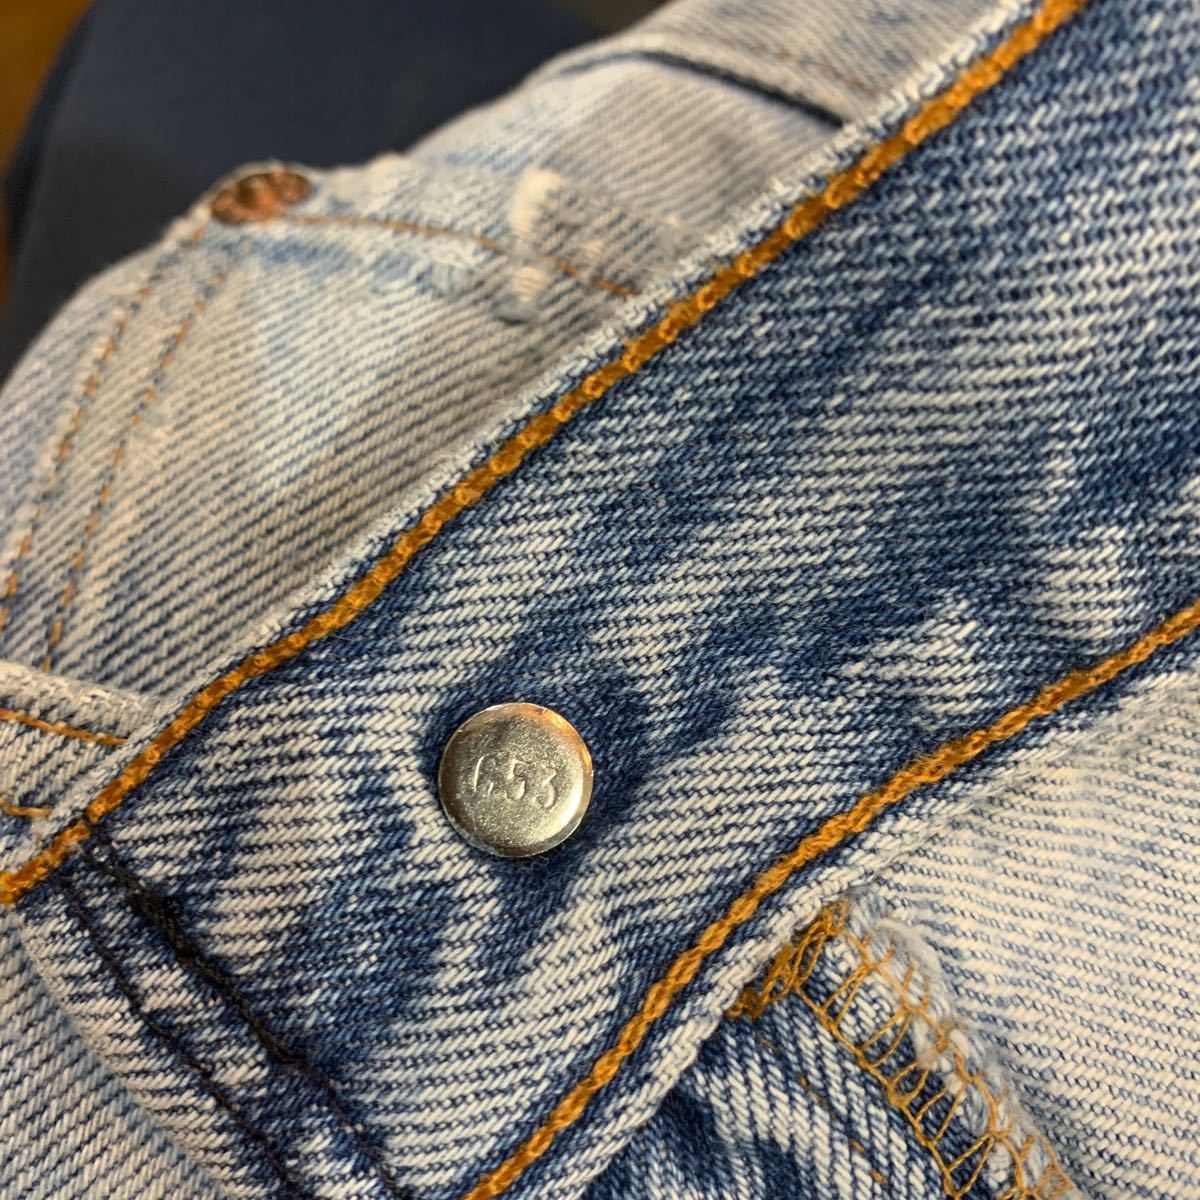 90s Levi's 501 米国製 w35 トップボタン裏653 リーバイス MADE IN U.S.A. _画像5